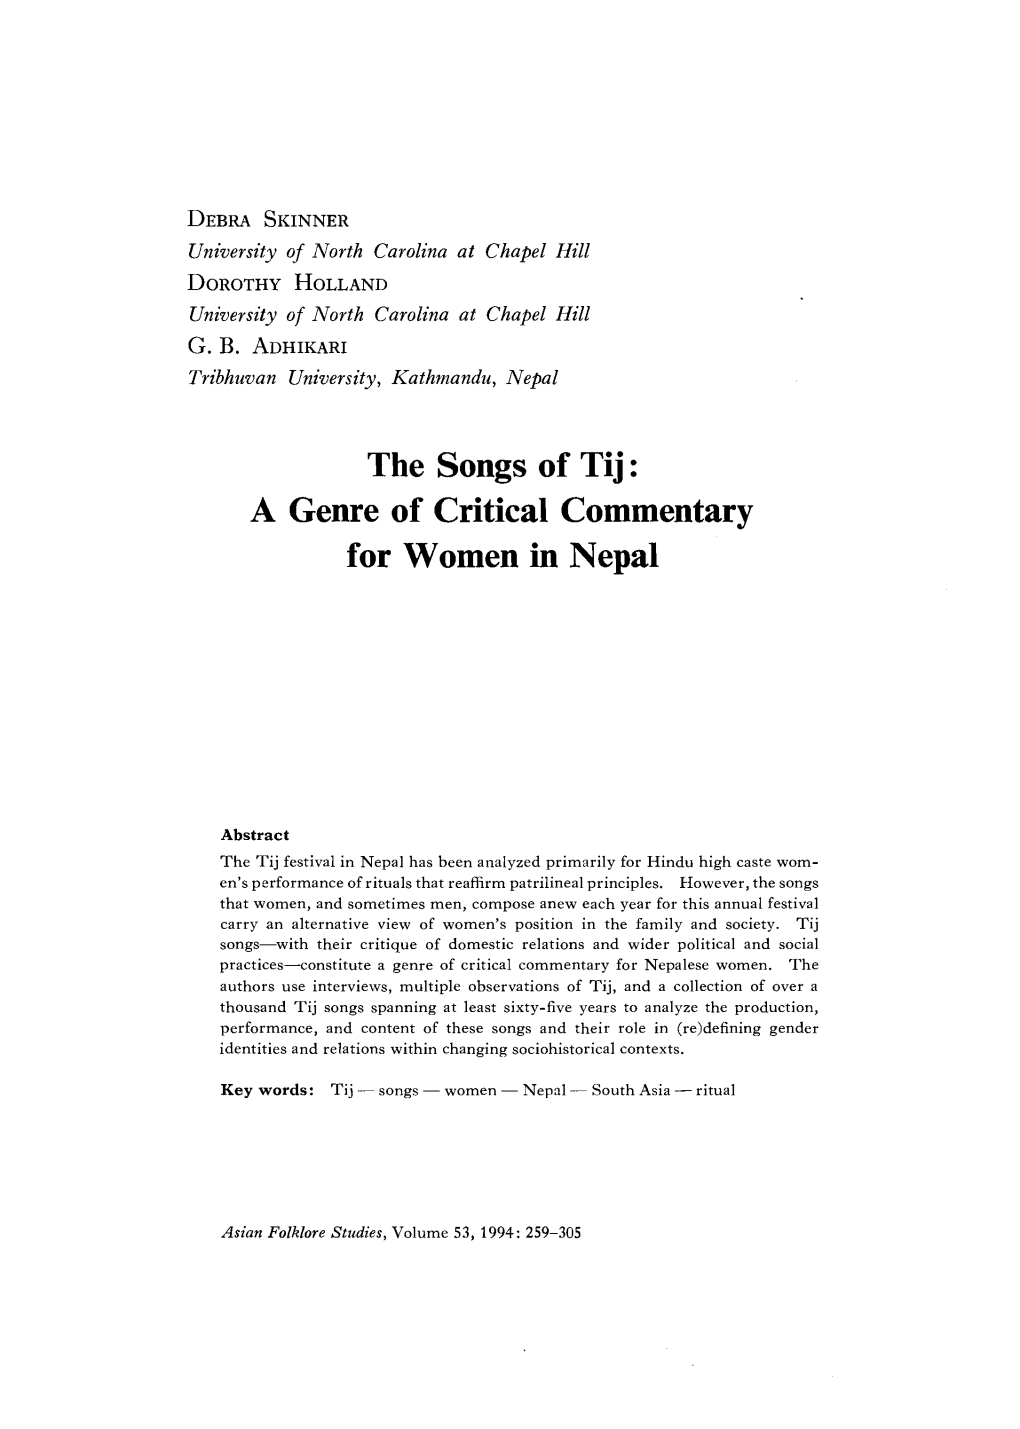 The Songs of Tij: a Genre of Critical Commentary for Women in Nepal